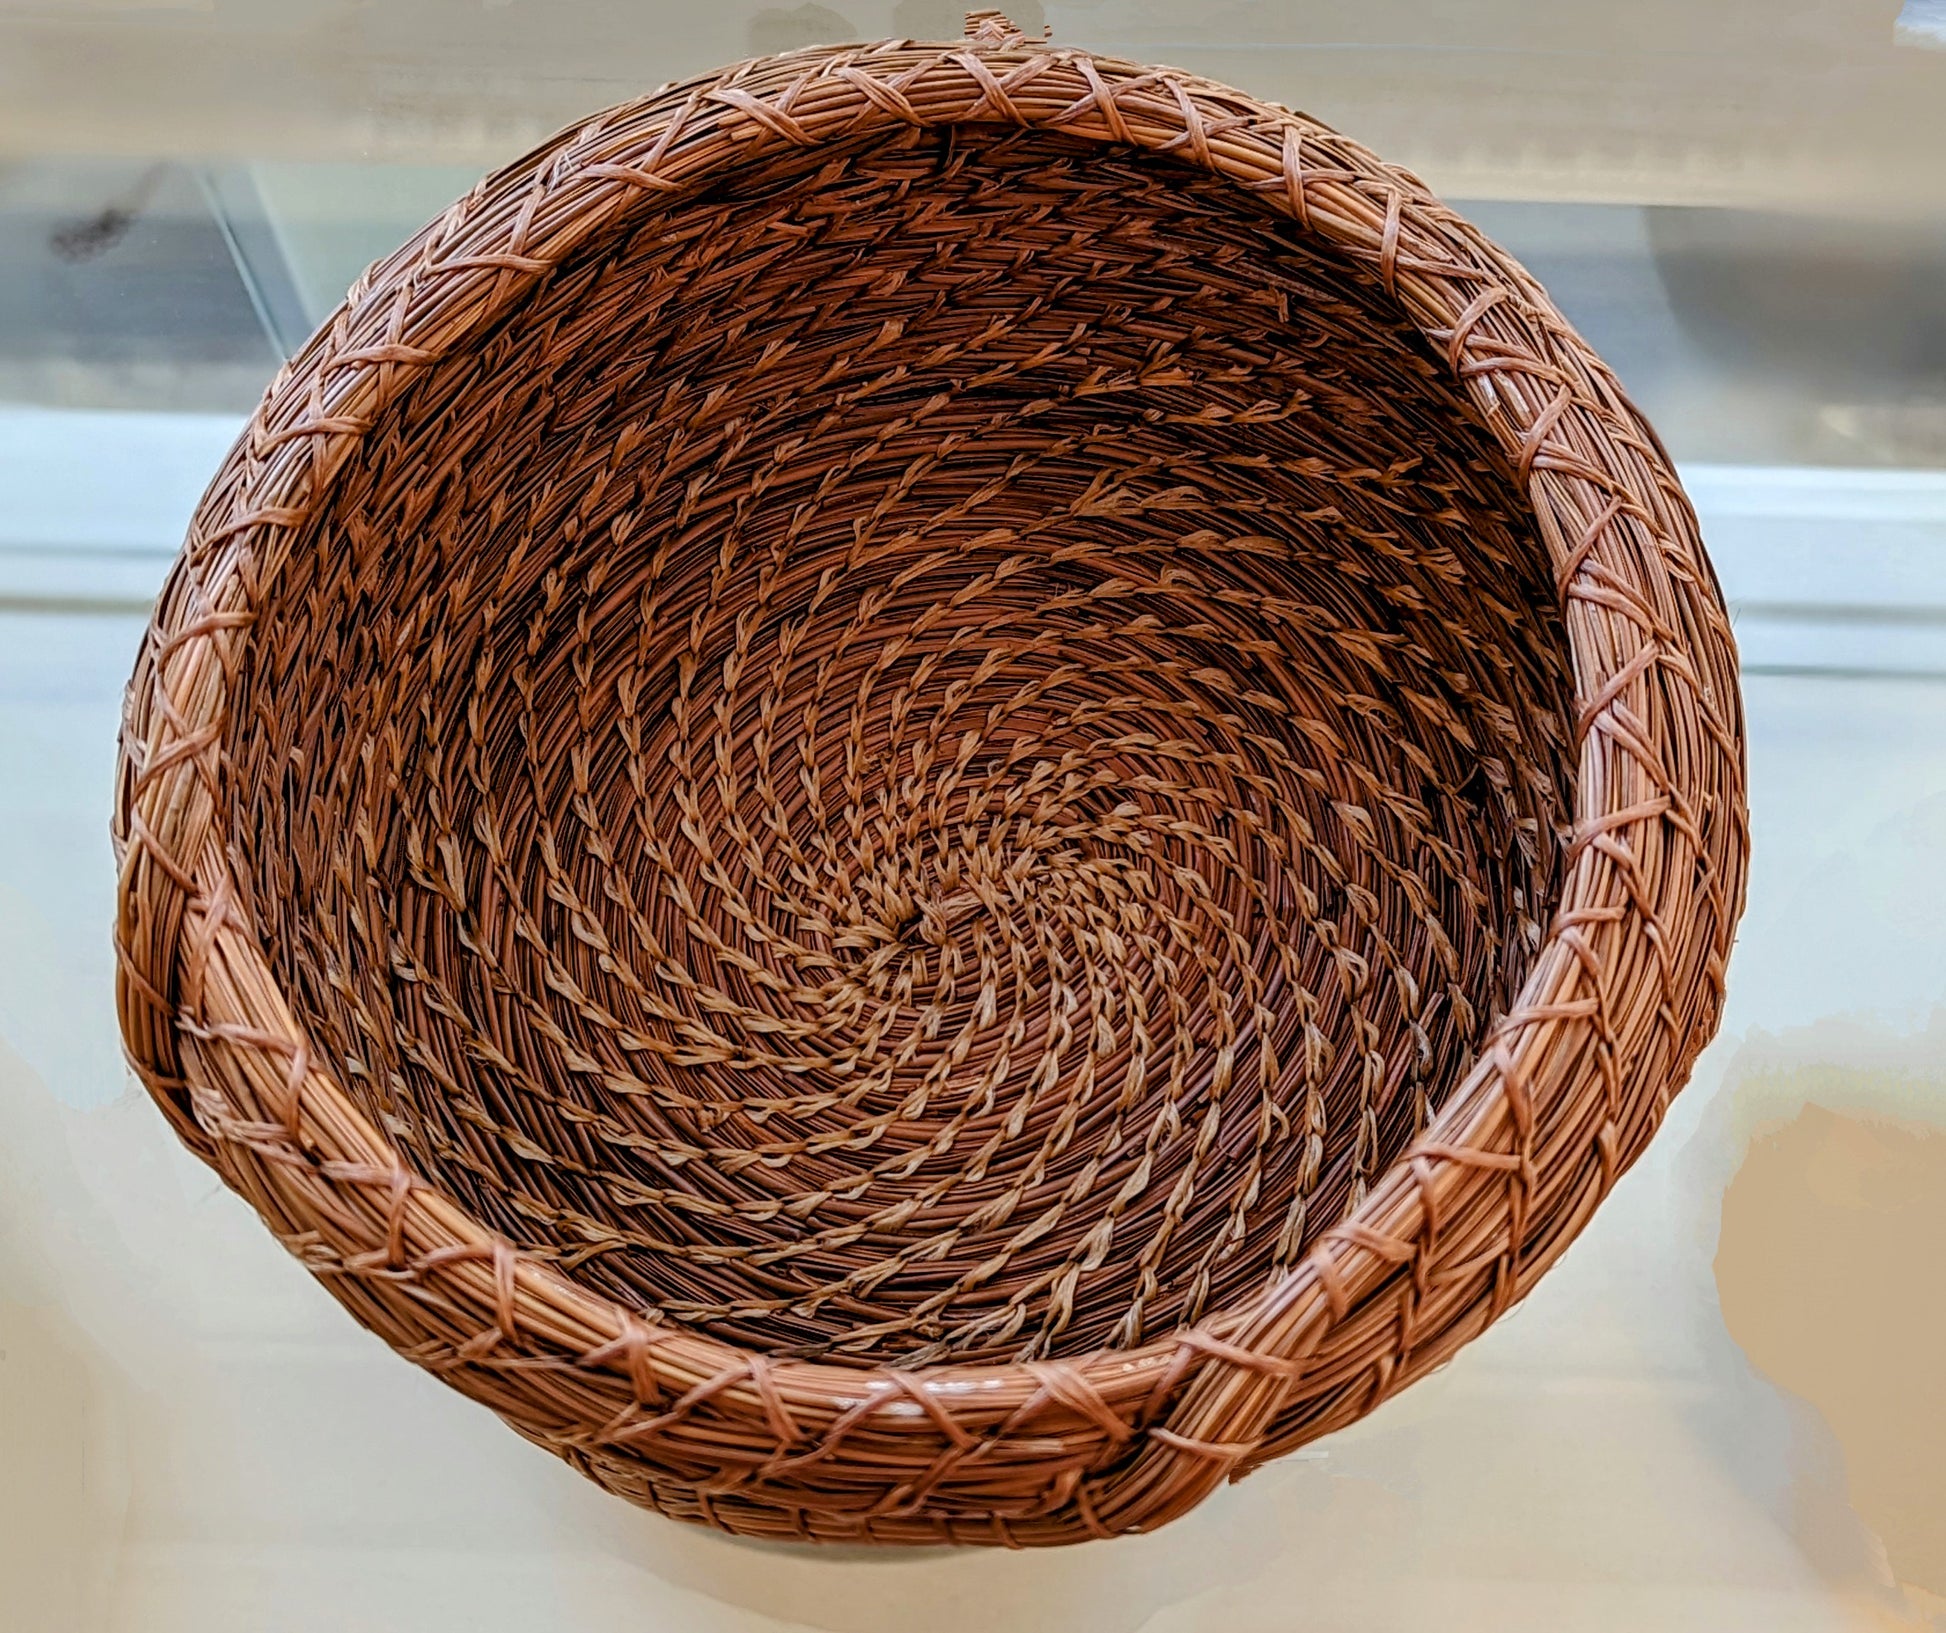 Pine Needle Basketry: Tools and Materials 